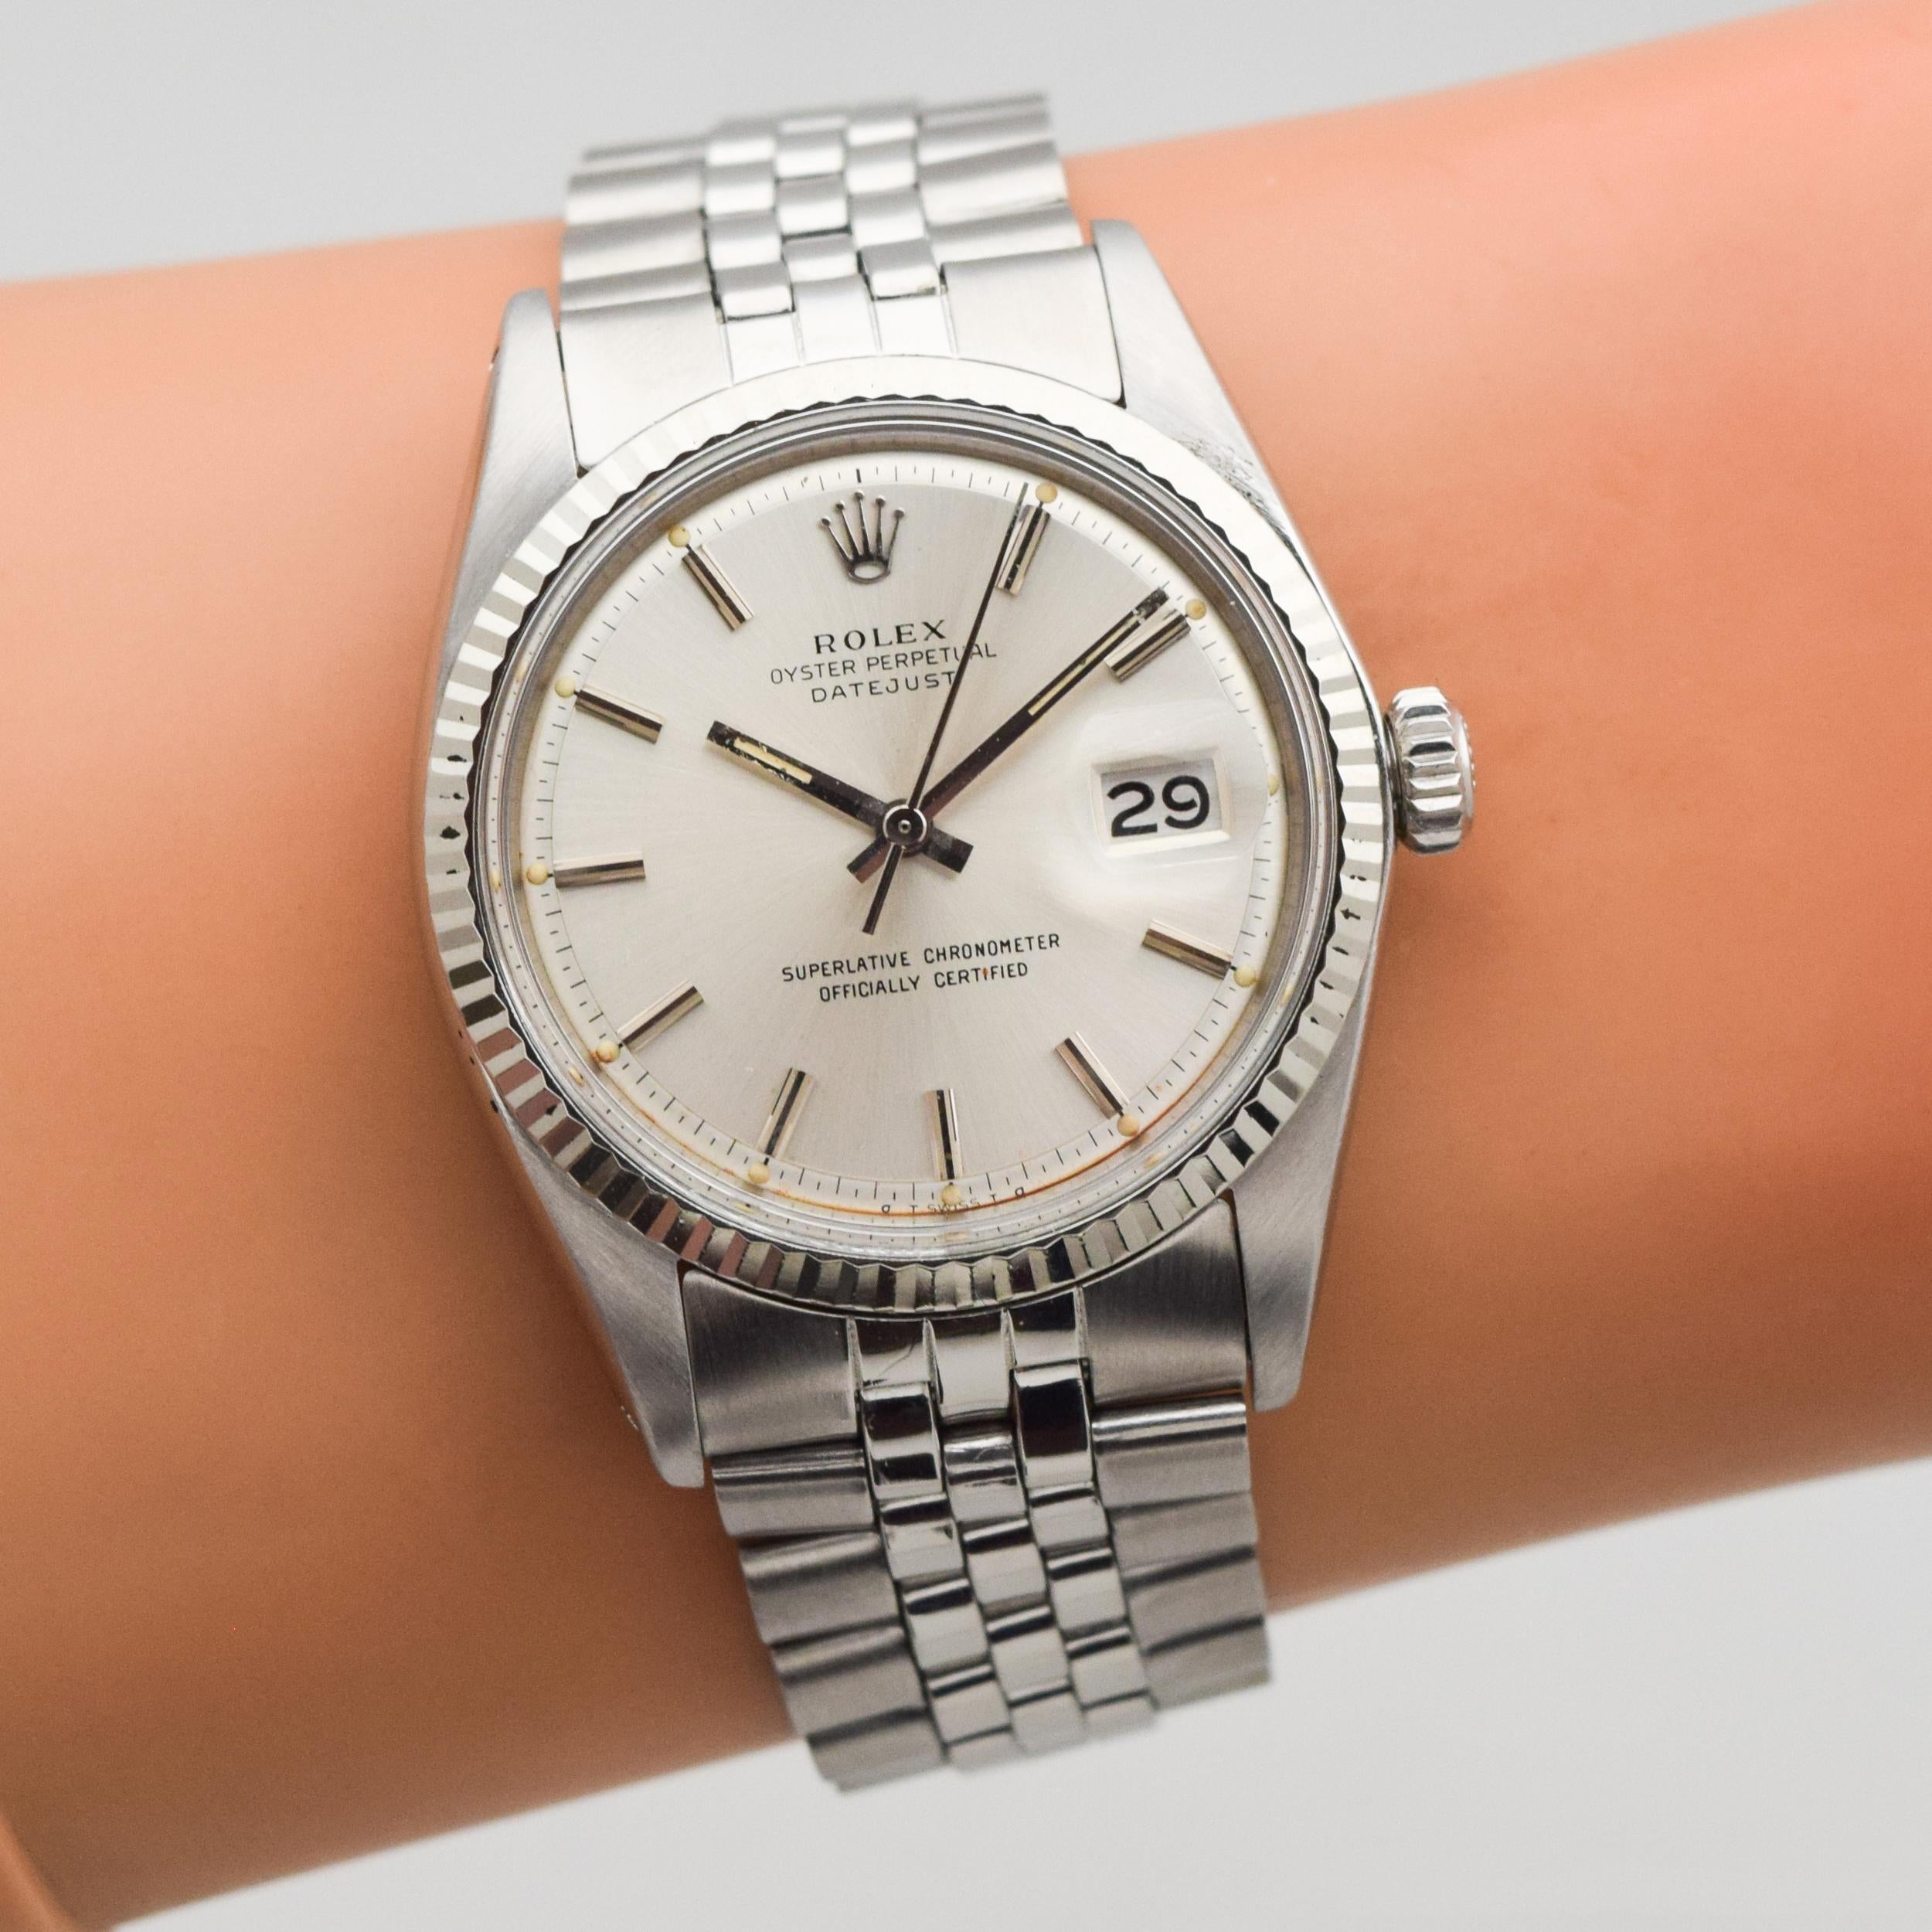 Vintage Rolex Datejust Reference 1601 Watch, 1973 For Sale 1